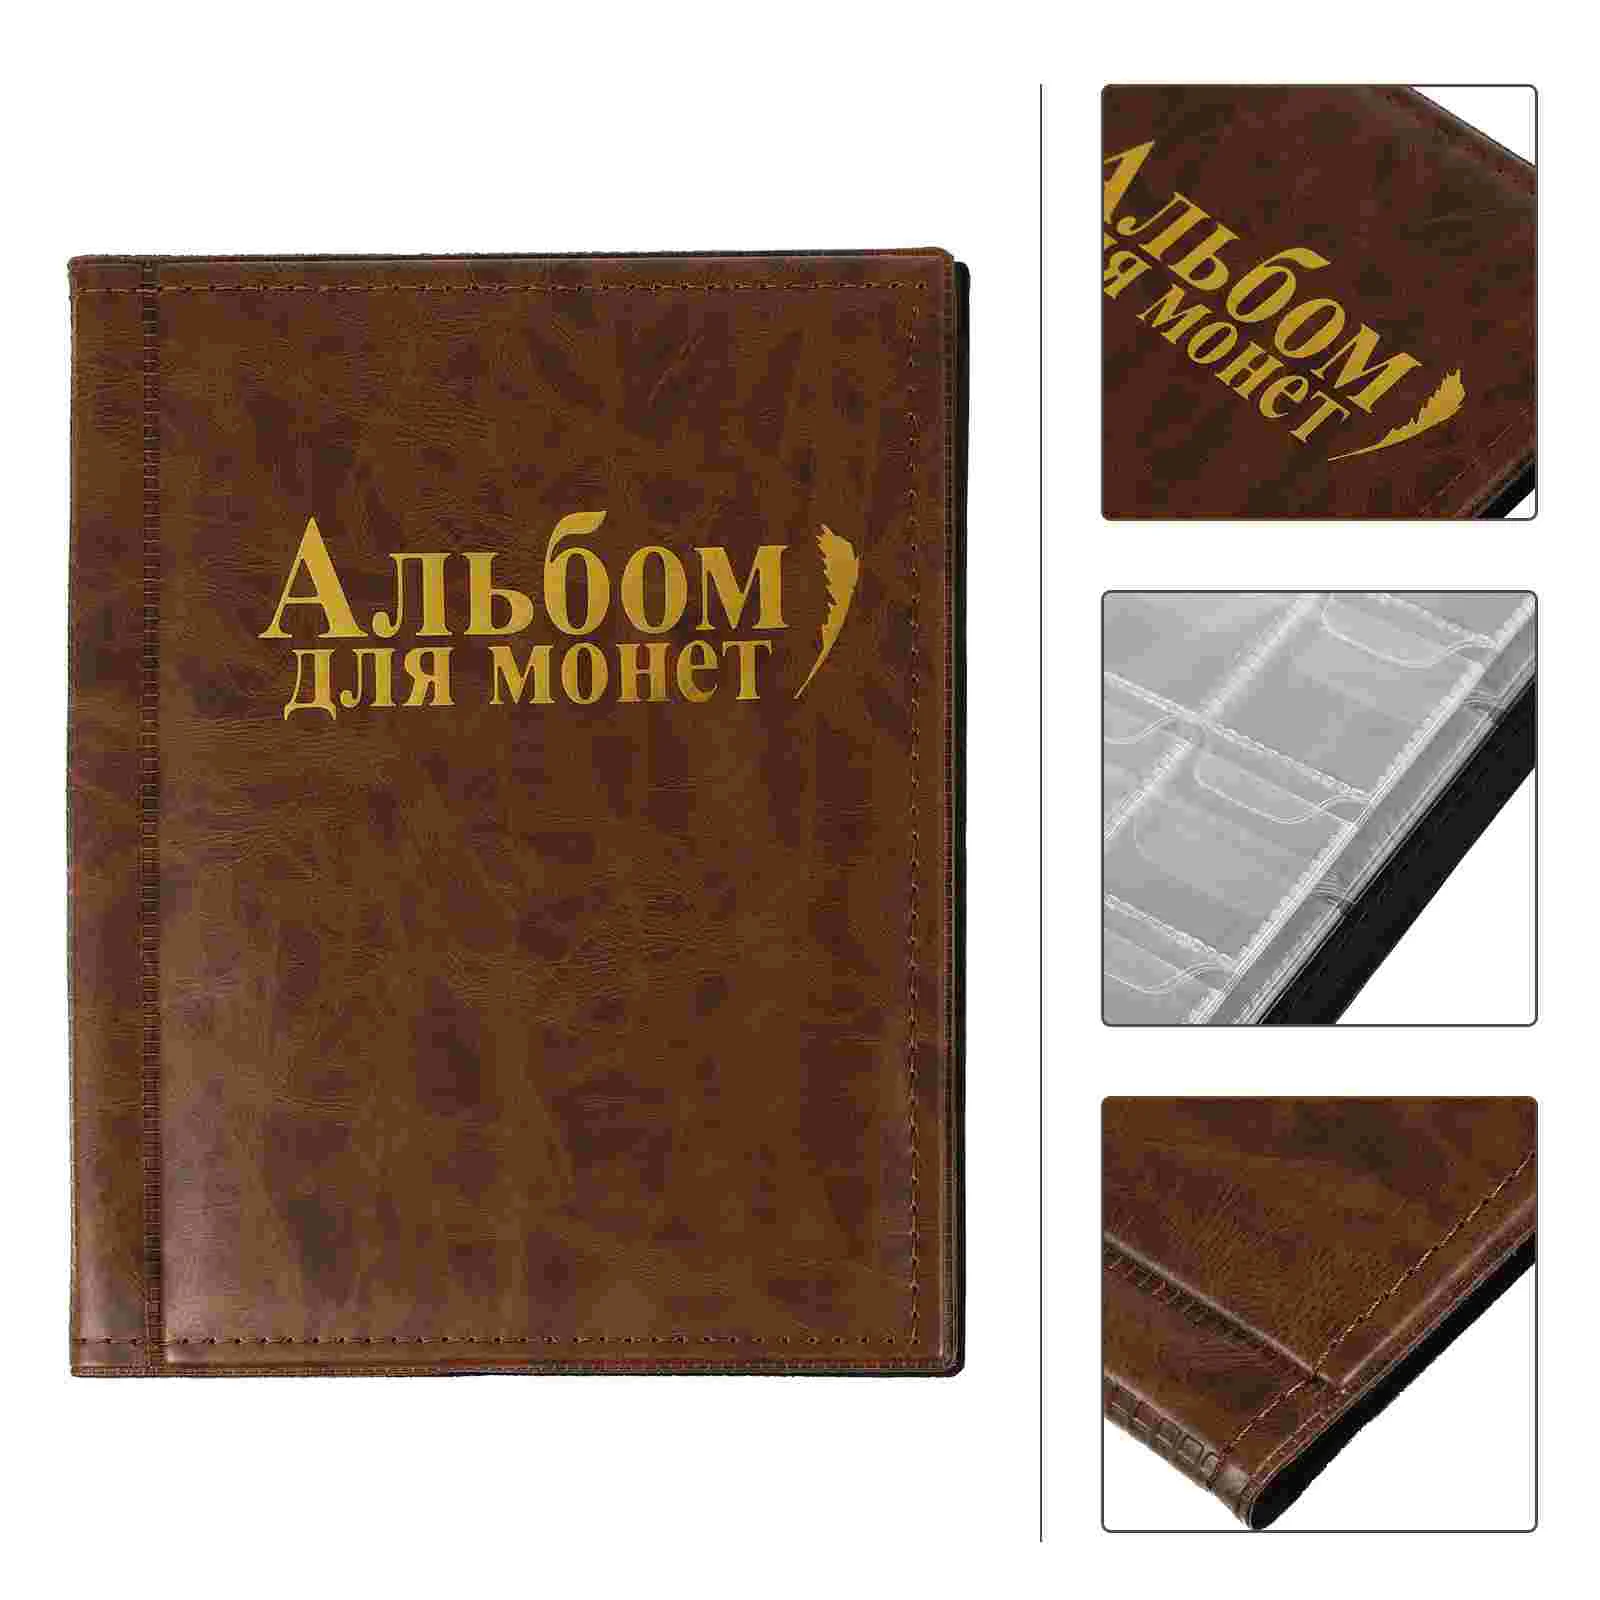 

Holder Album for Collectors Paper 250 Pockets Storage Book for Dollars Currency Quarters Foreign Coin